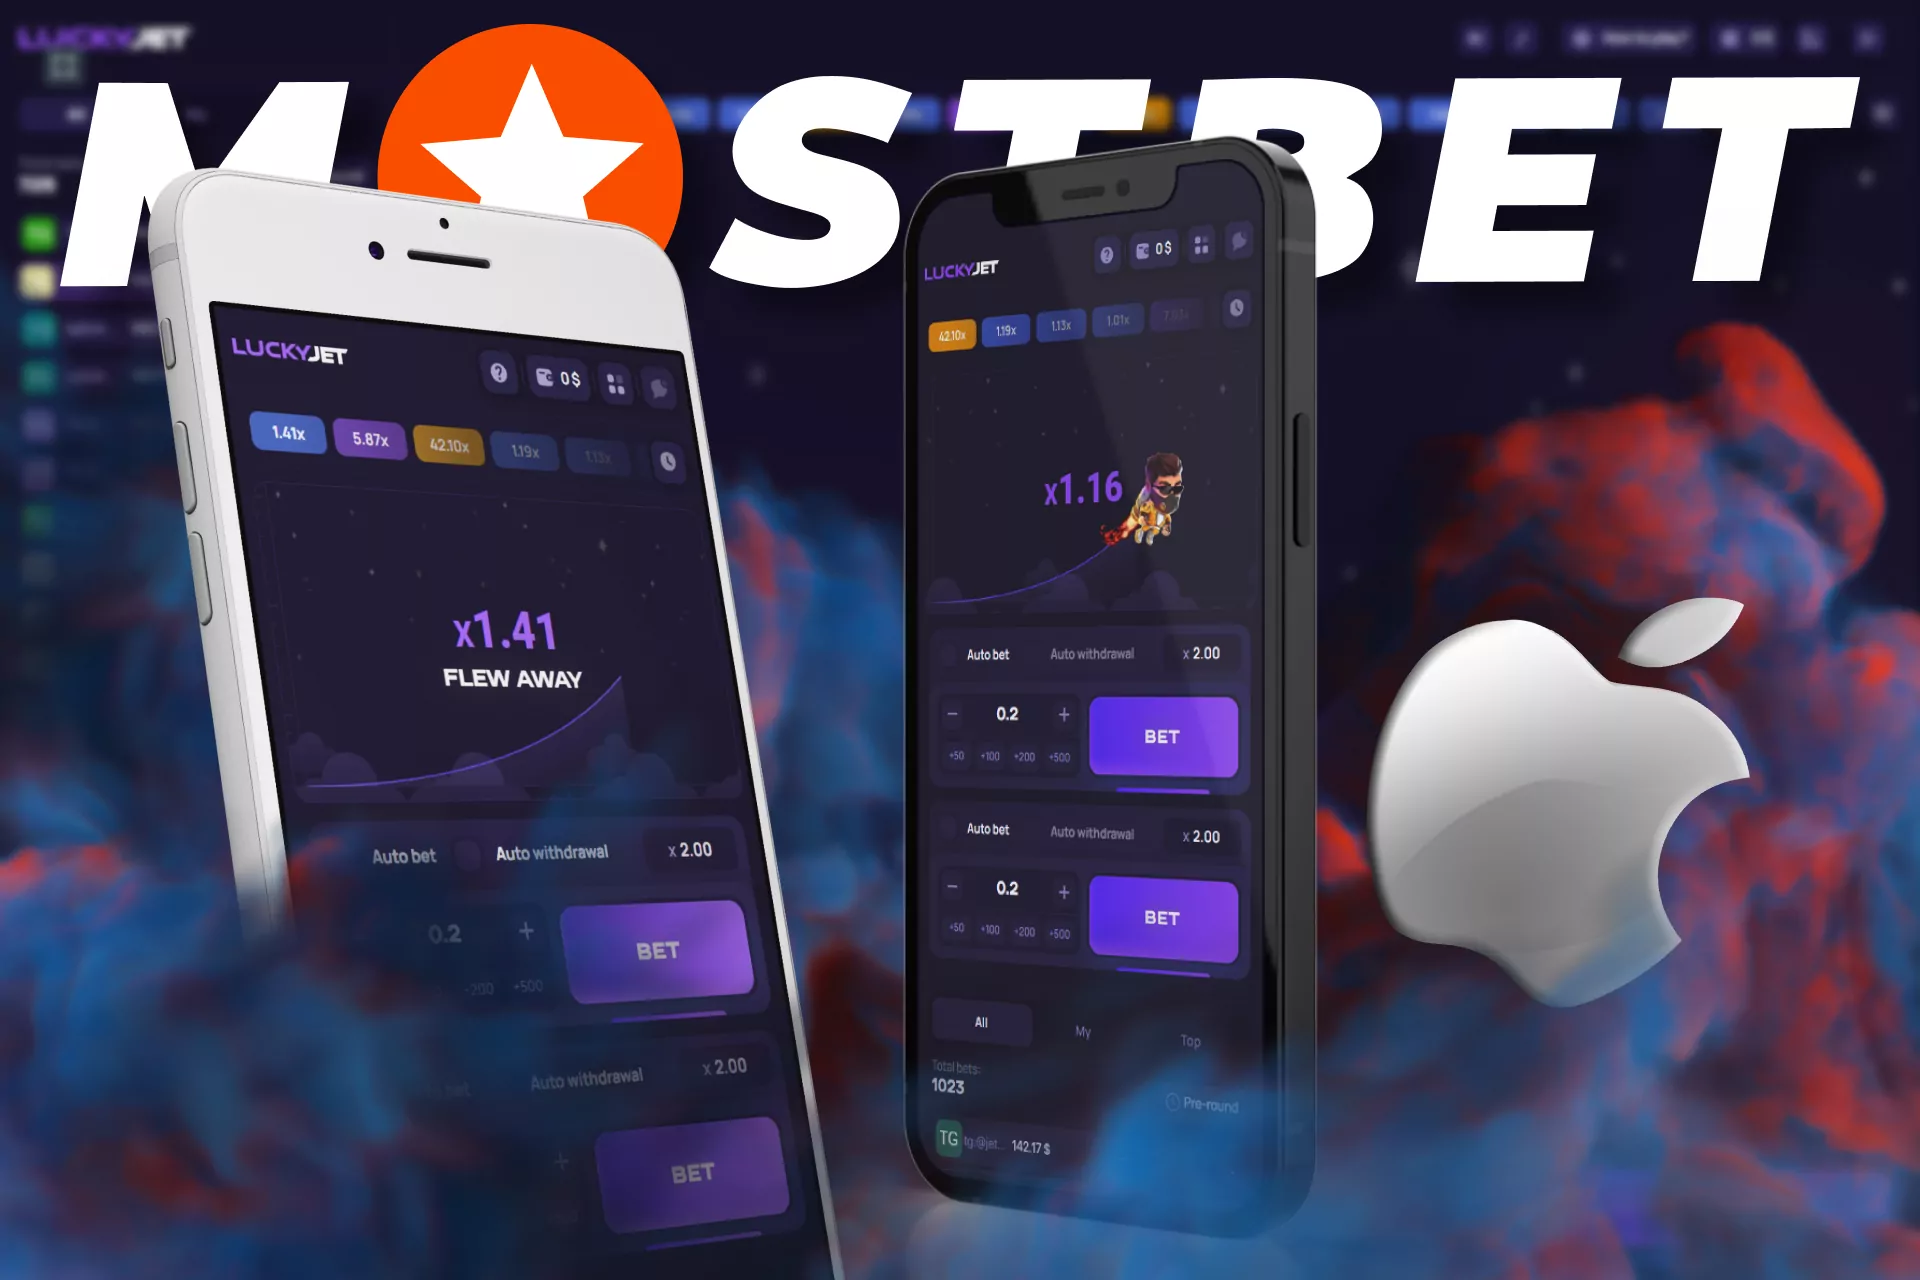 Lucky Jet is supported in Mostbet on various iOS devices.